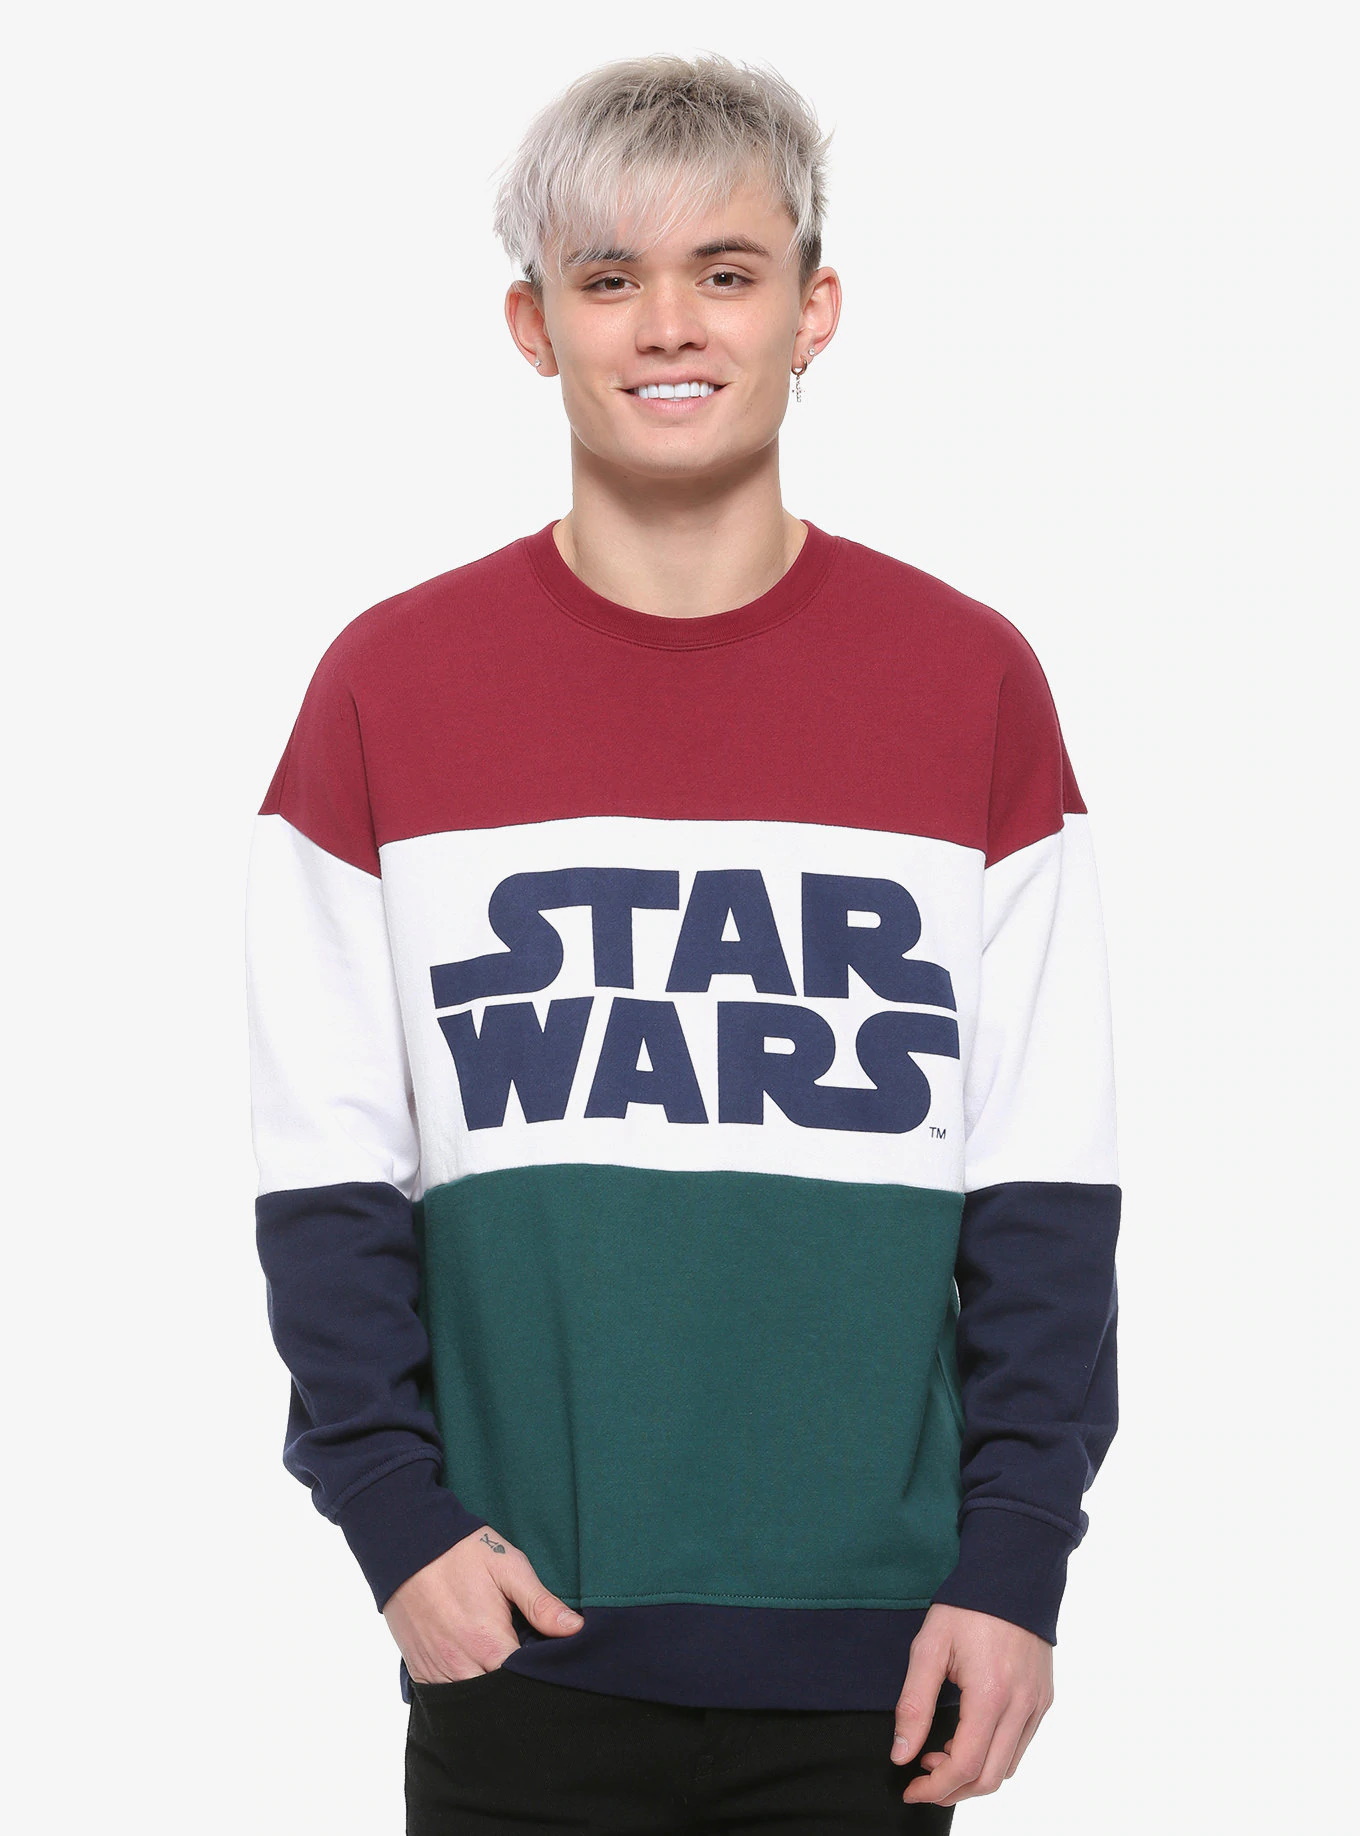 Our Universe Star Wars Color Block Sweatshirt at Her Universe